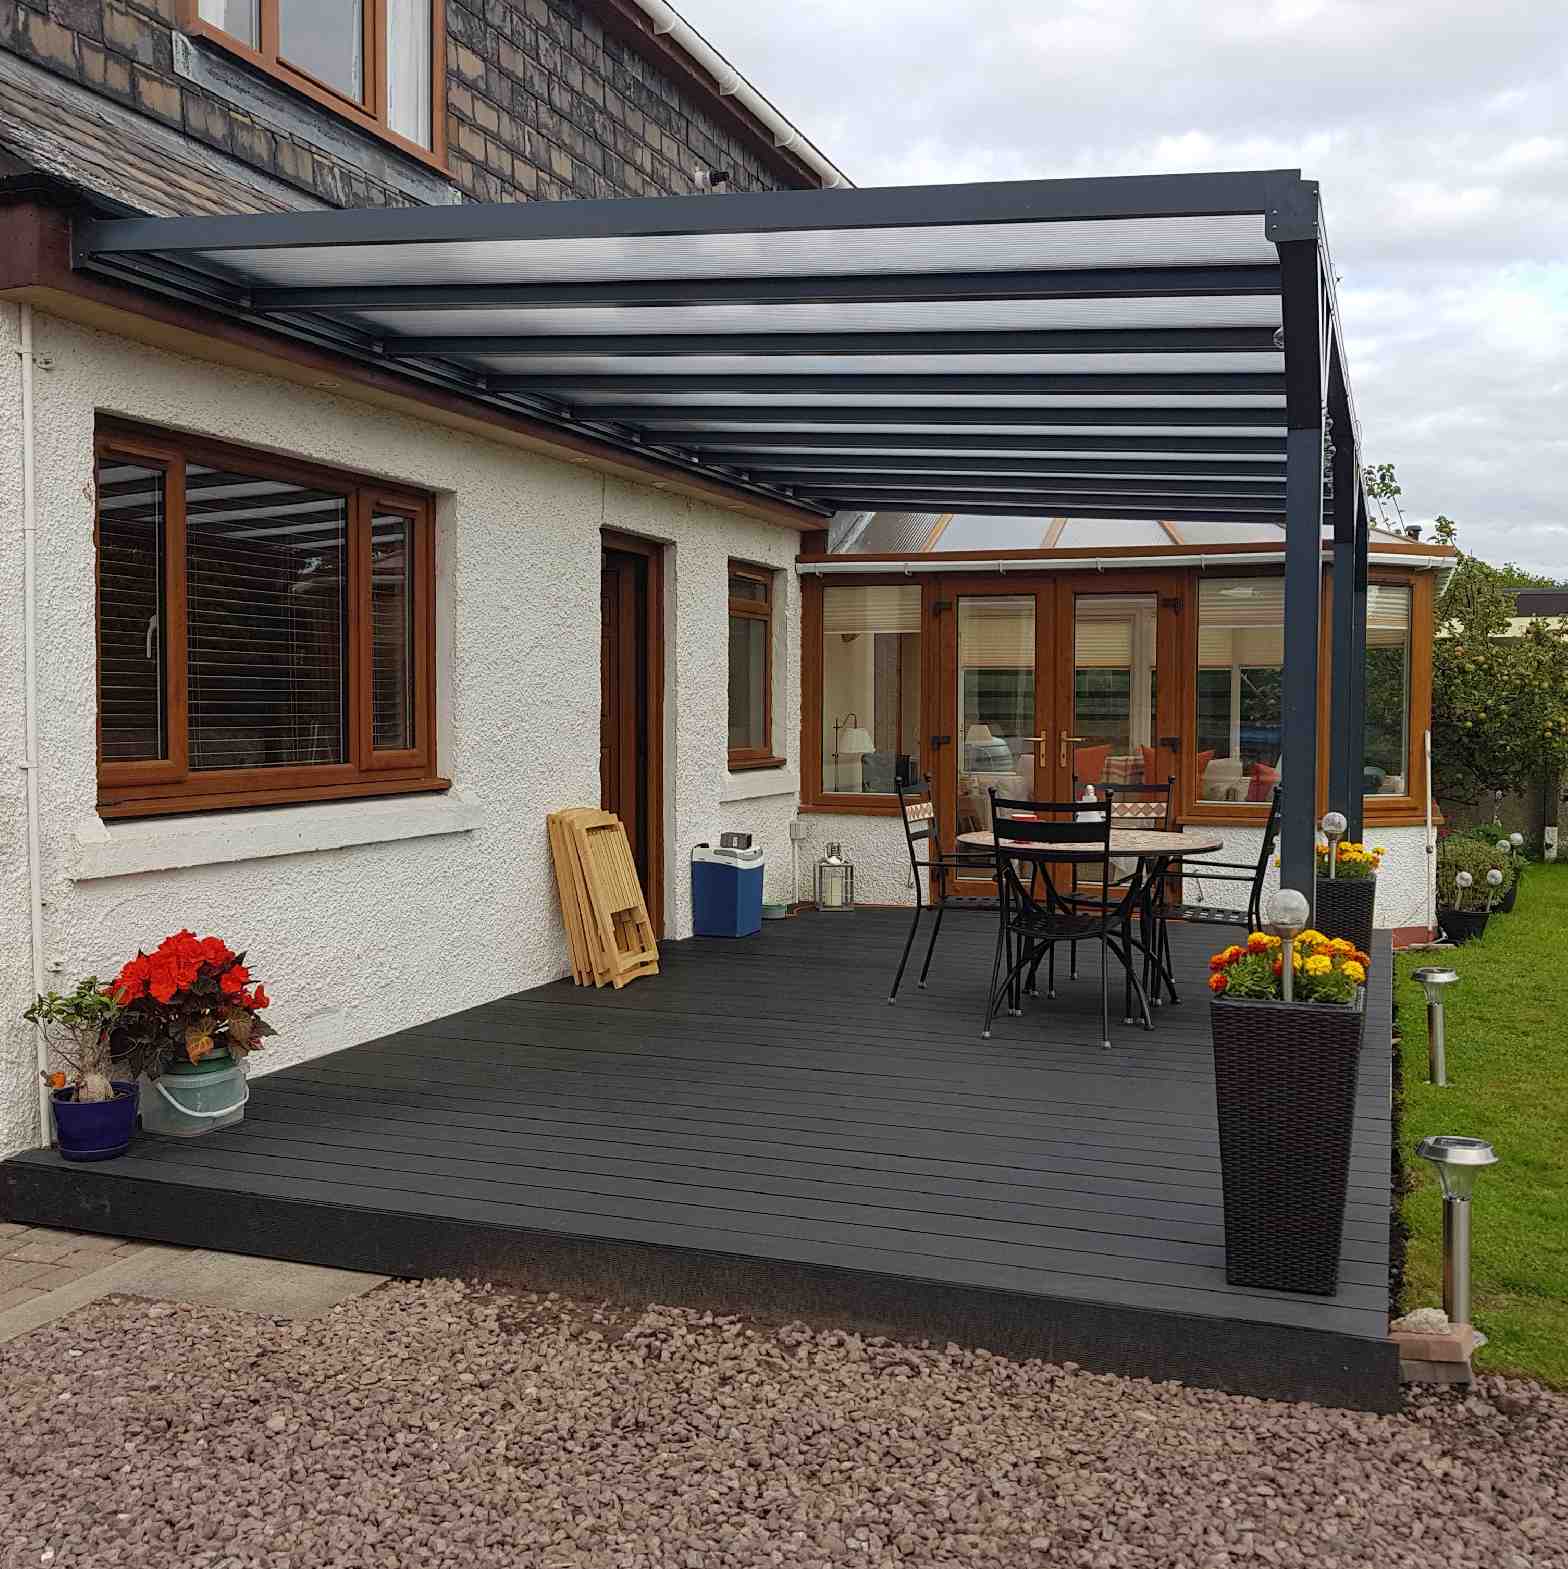 Buy Omega Verandah, Anthracite Grey, 6mm Glass Clear Plate Polycarbonate Glazing - 7.0m (W) x 3.5m (P), (4) Supporting Posts online today